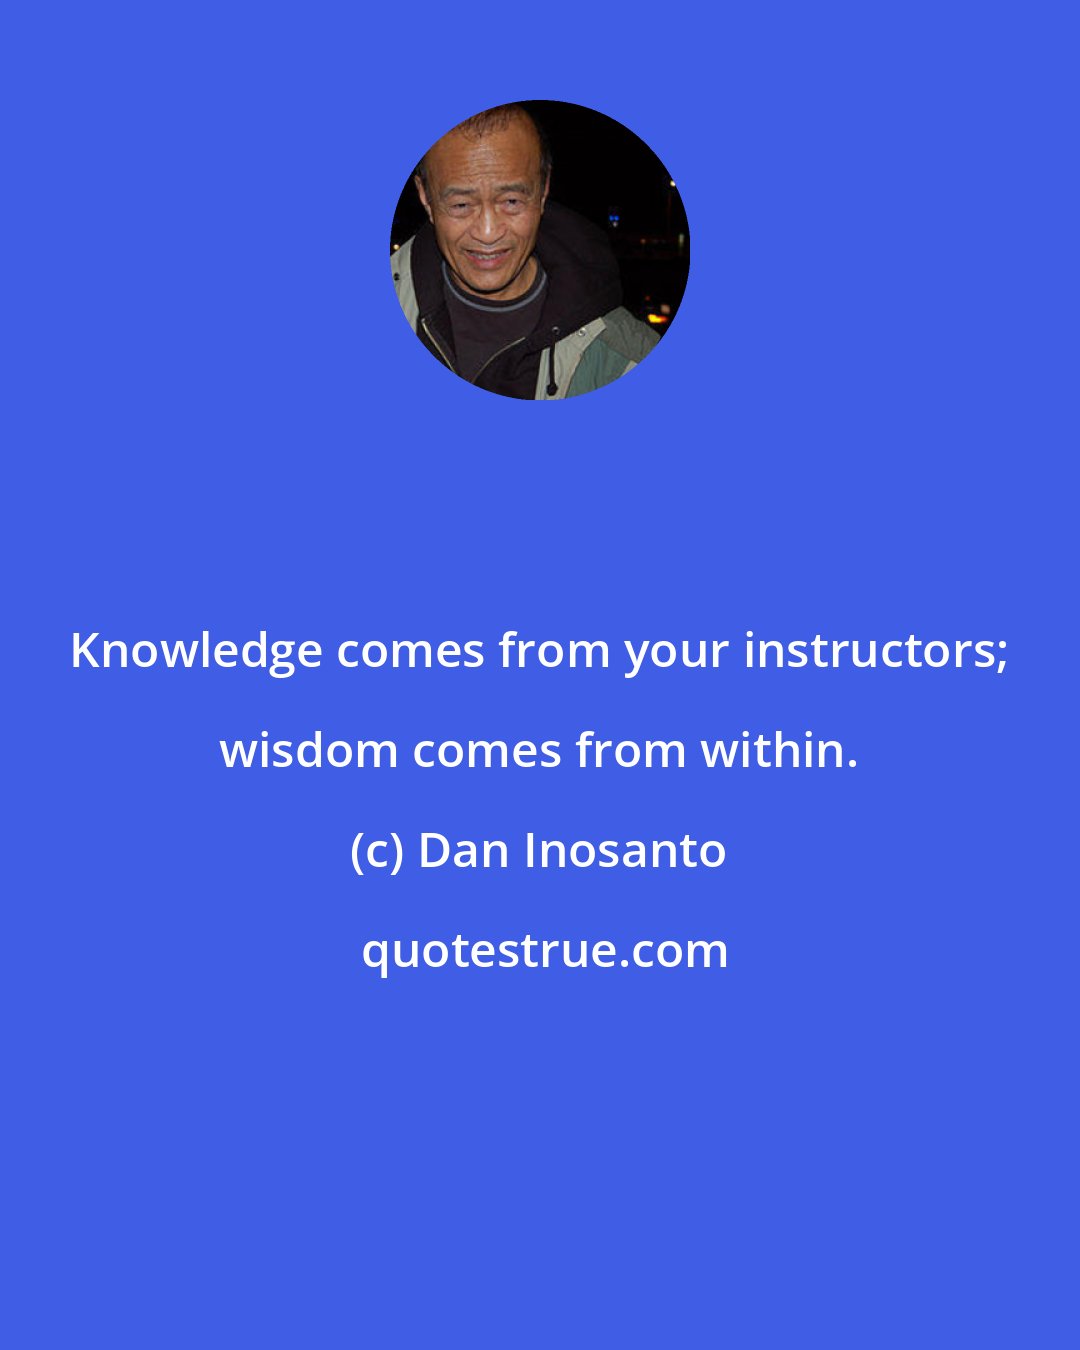 Dan Inosanto: Knowledge comes from your instructors; wisdom comes from within.